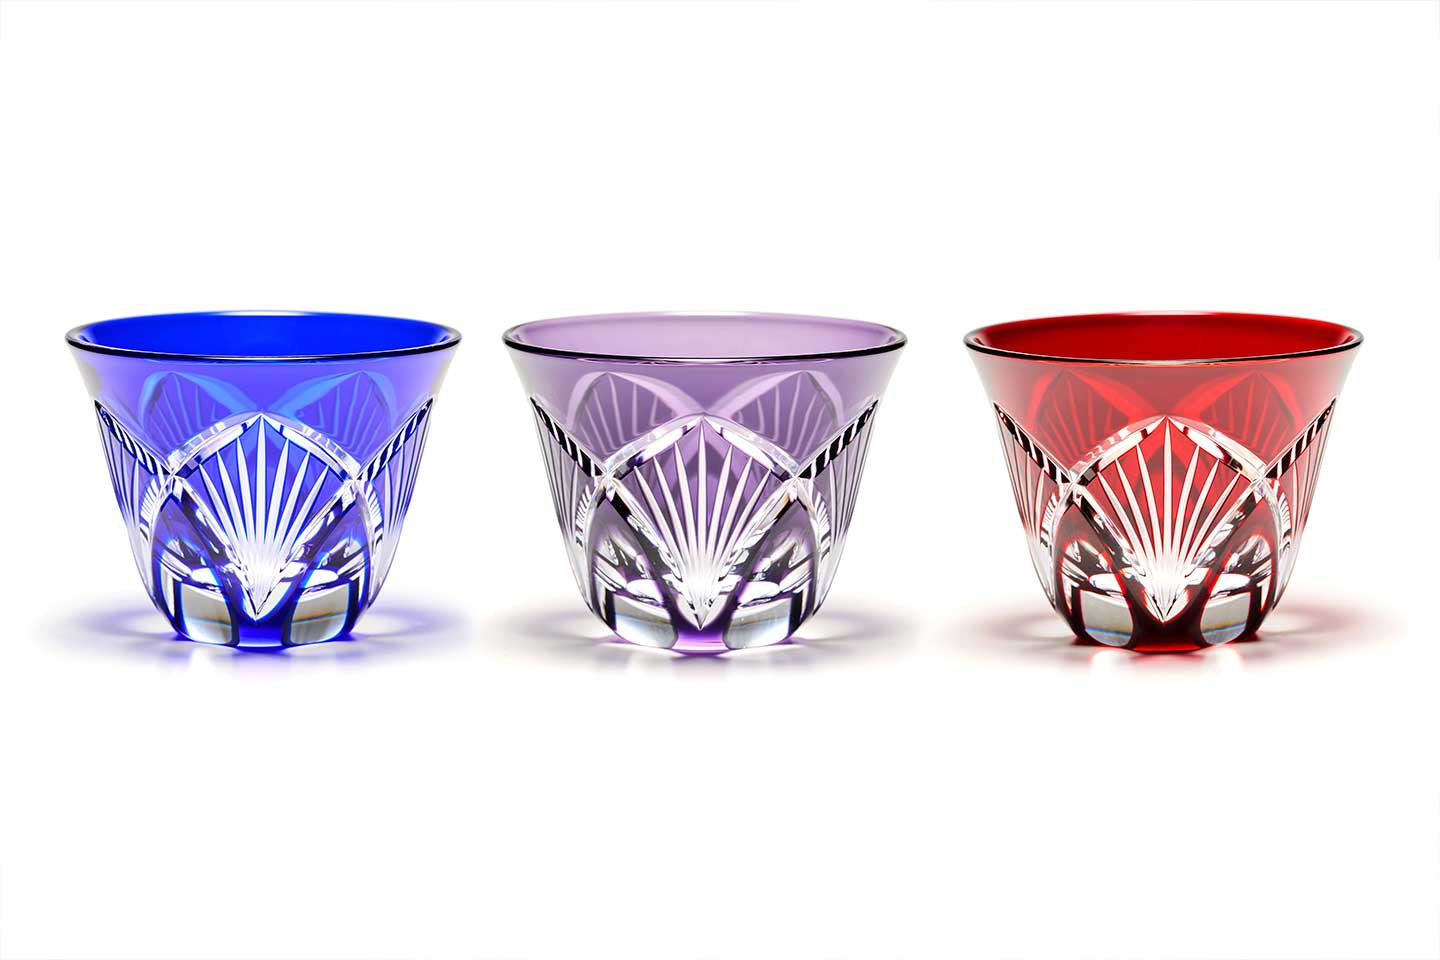 Edo Kiriko: Cut Glassware with International Roots and a Uniquely Tokyo Aesthetic